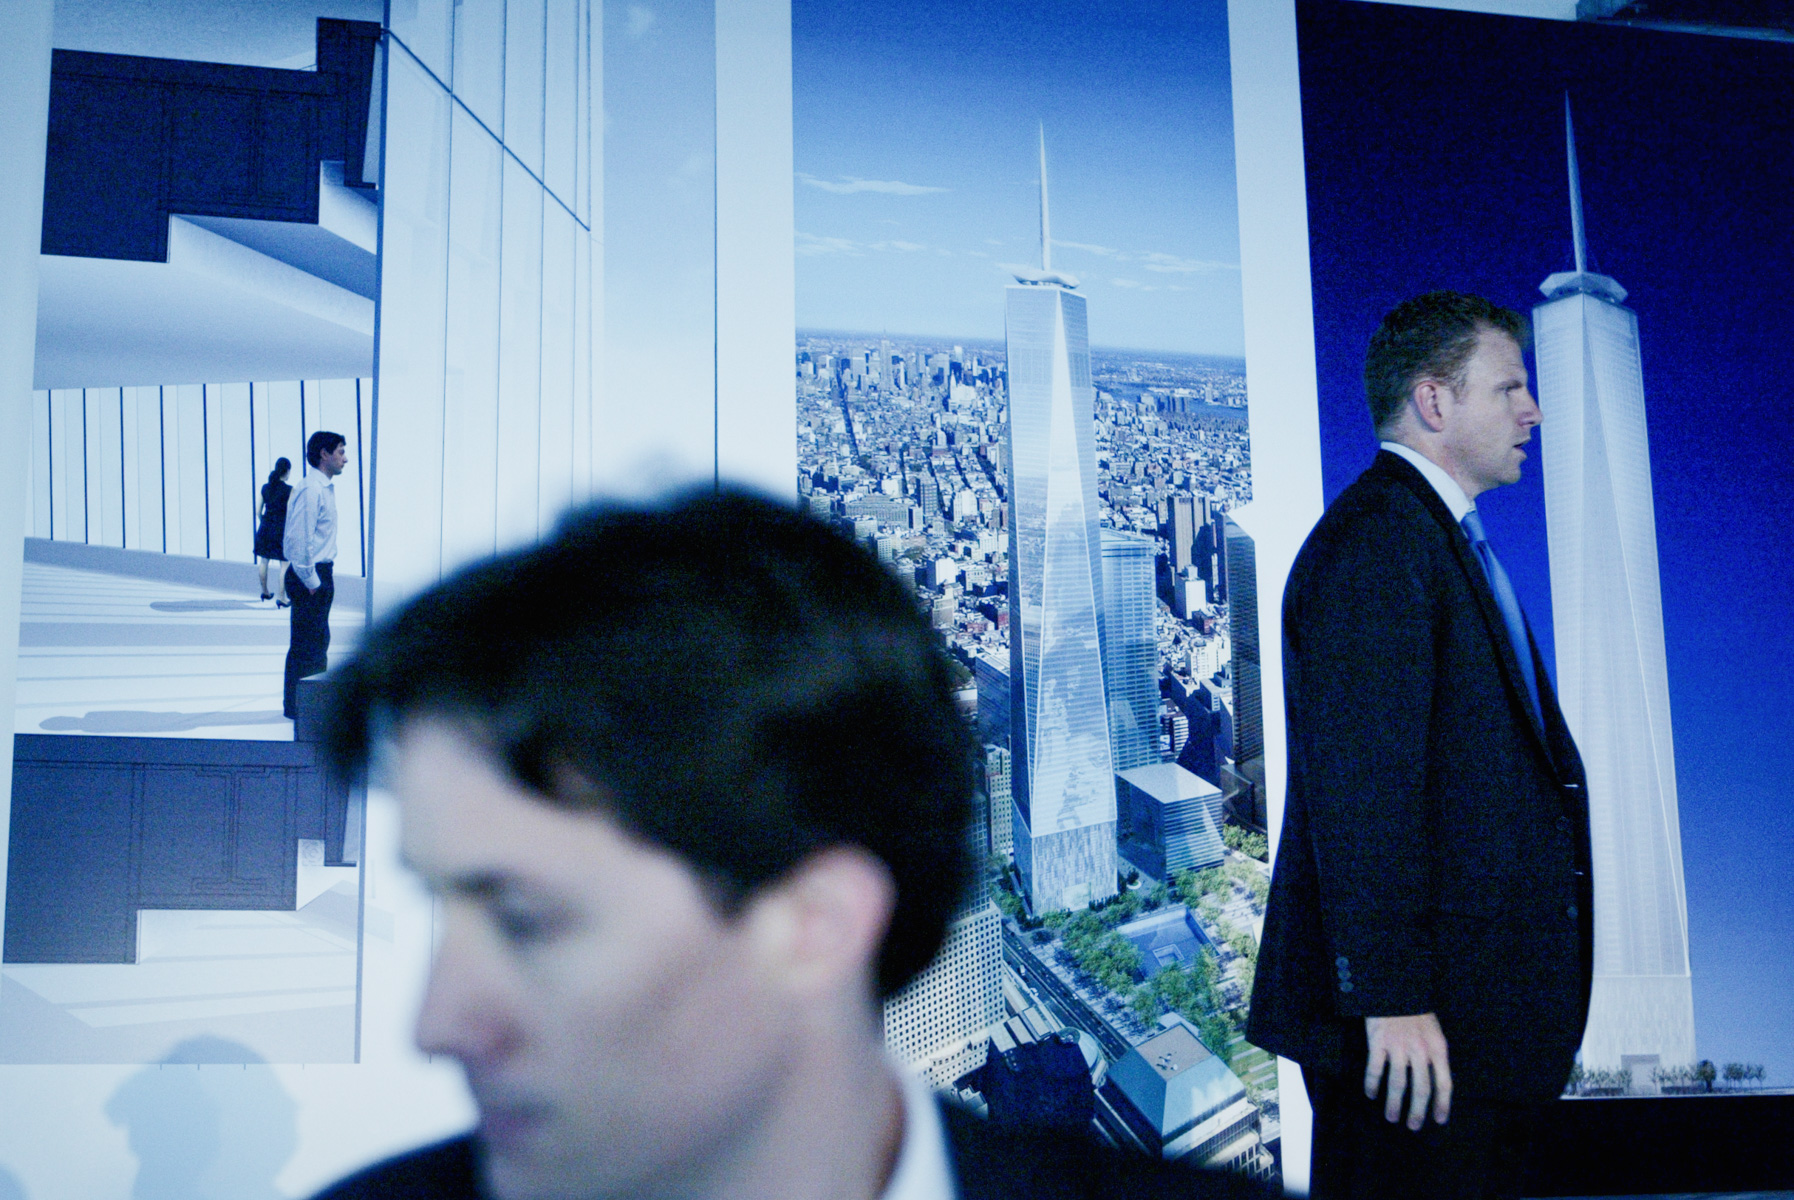 06/28/06 Manhattan, NY -   Photos from 7 World Trade Center where plans for the final Freedom Tower design were announced.  Photo Credit Erik Jacobs/The New York TimesAssignment  30025931A